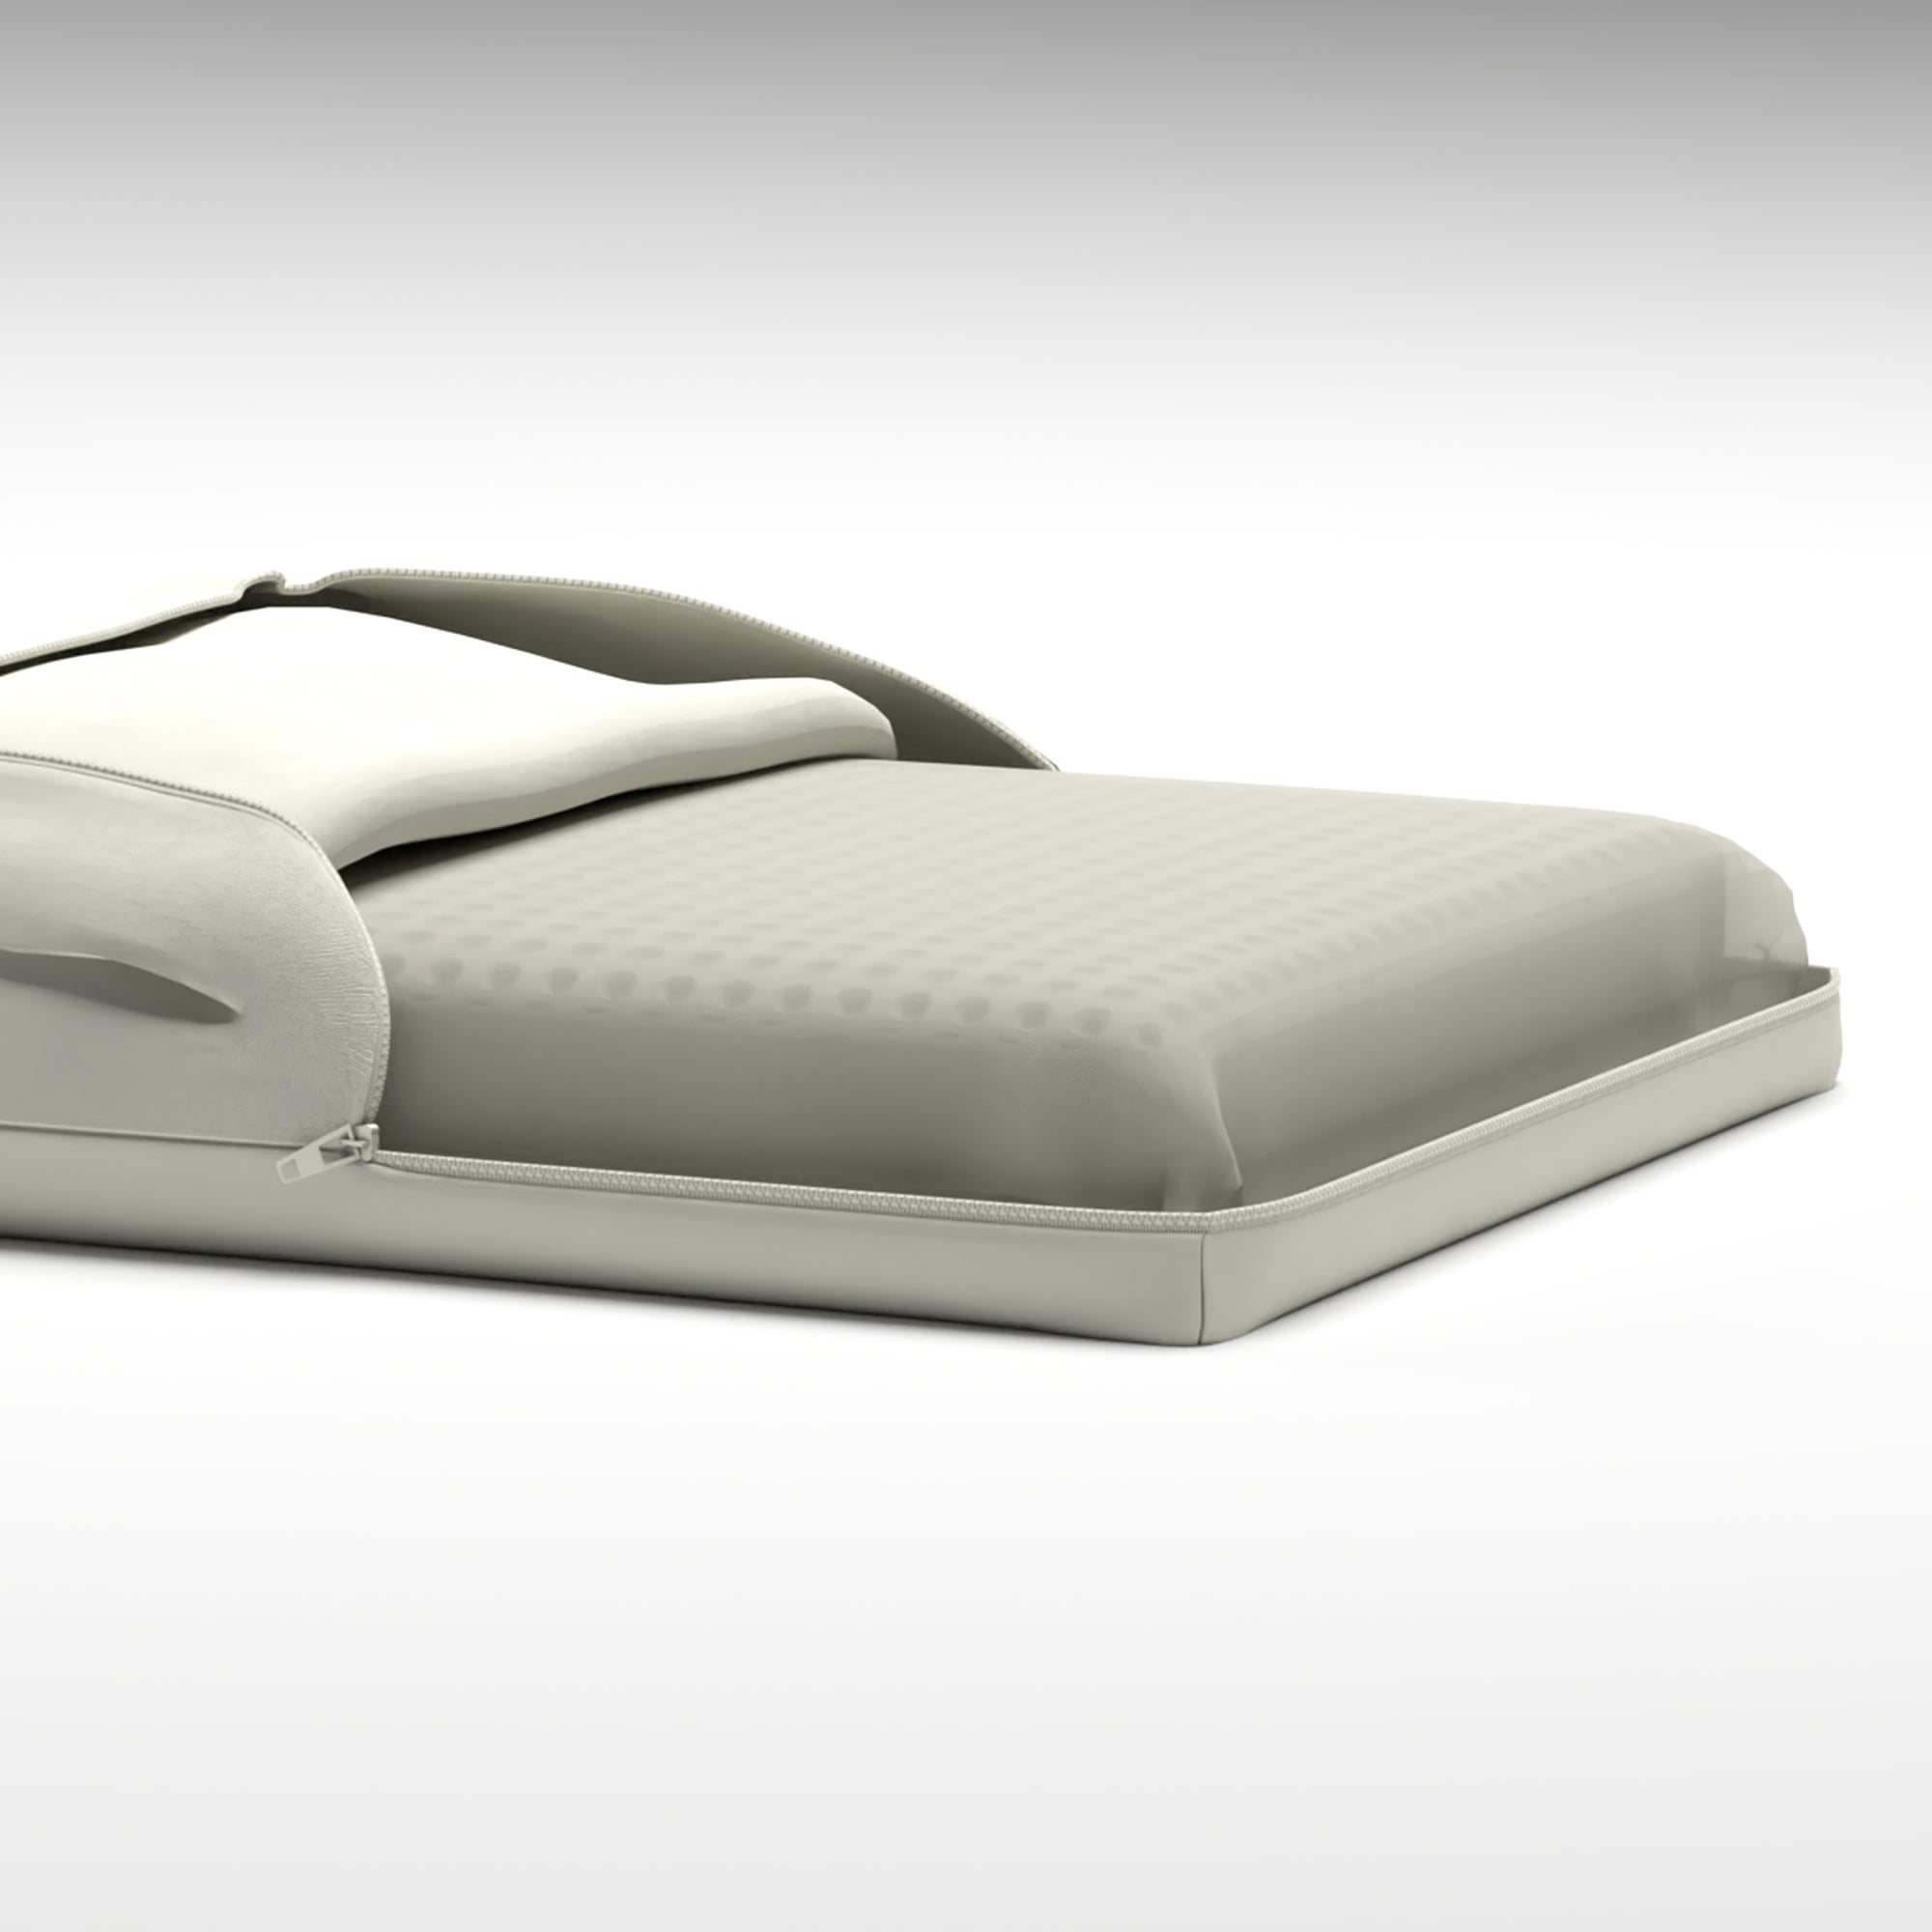 Low Profile Stomach and Back Sleeper Pillow - BlissfulNights.com